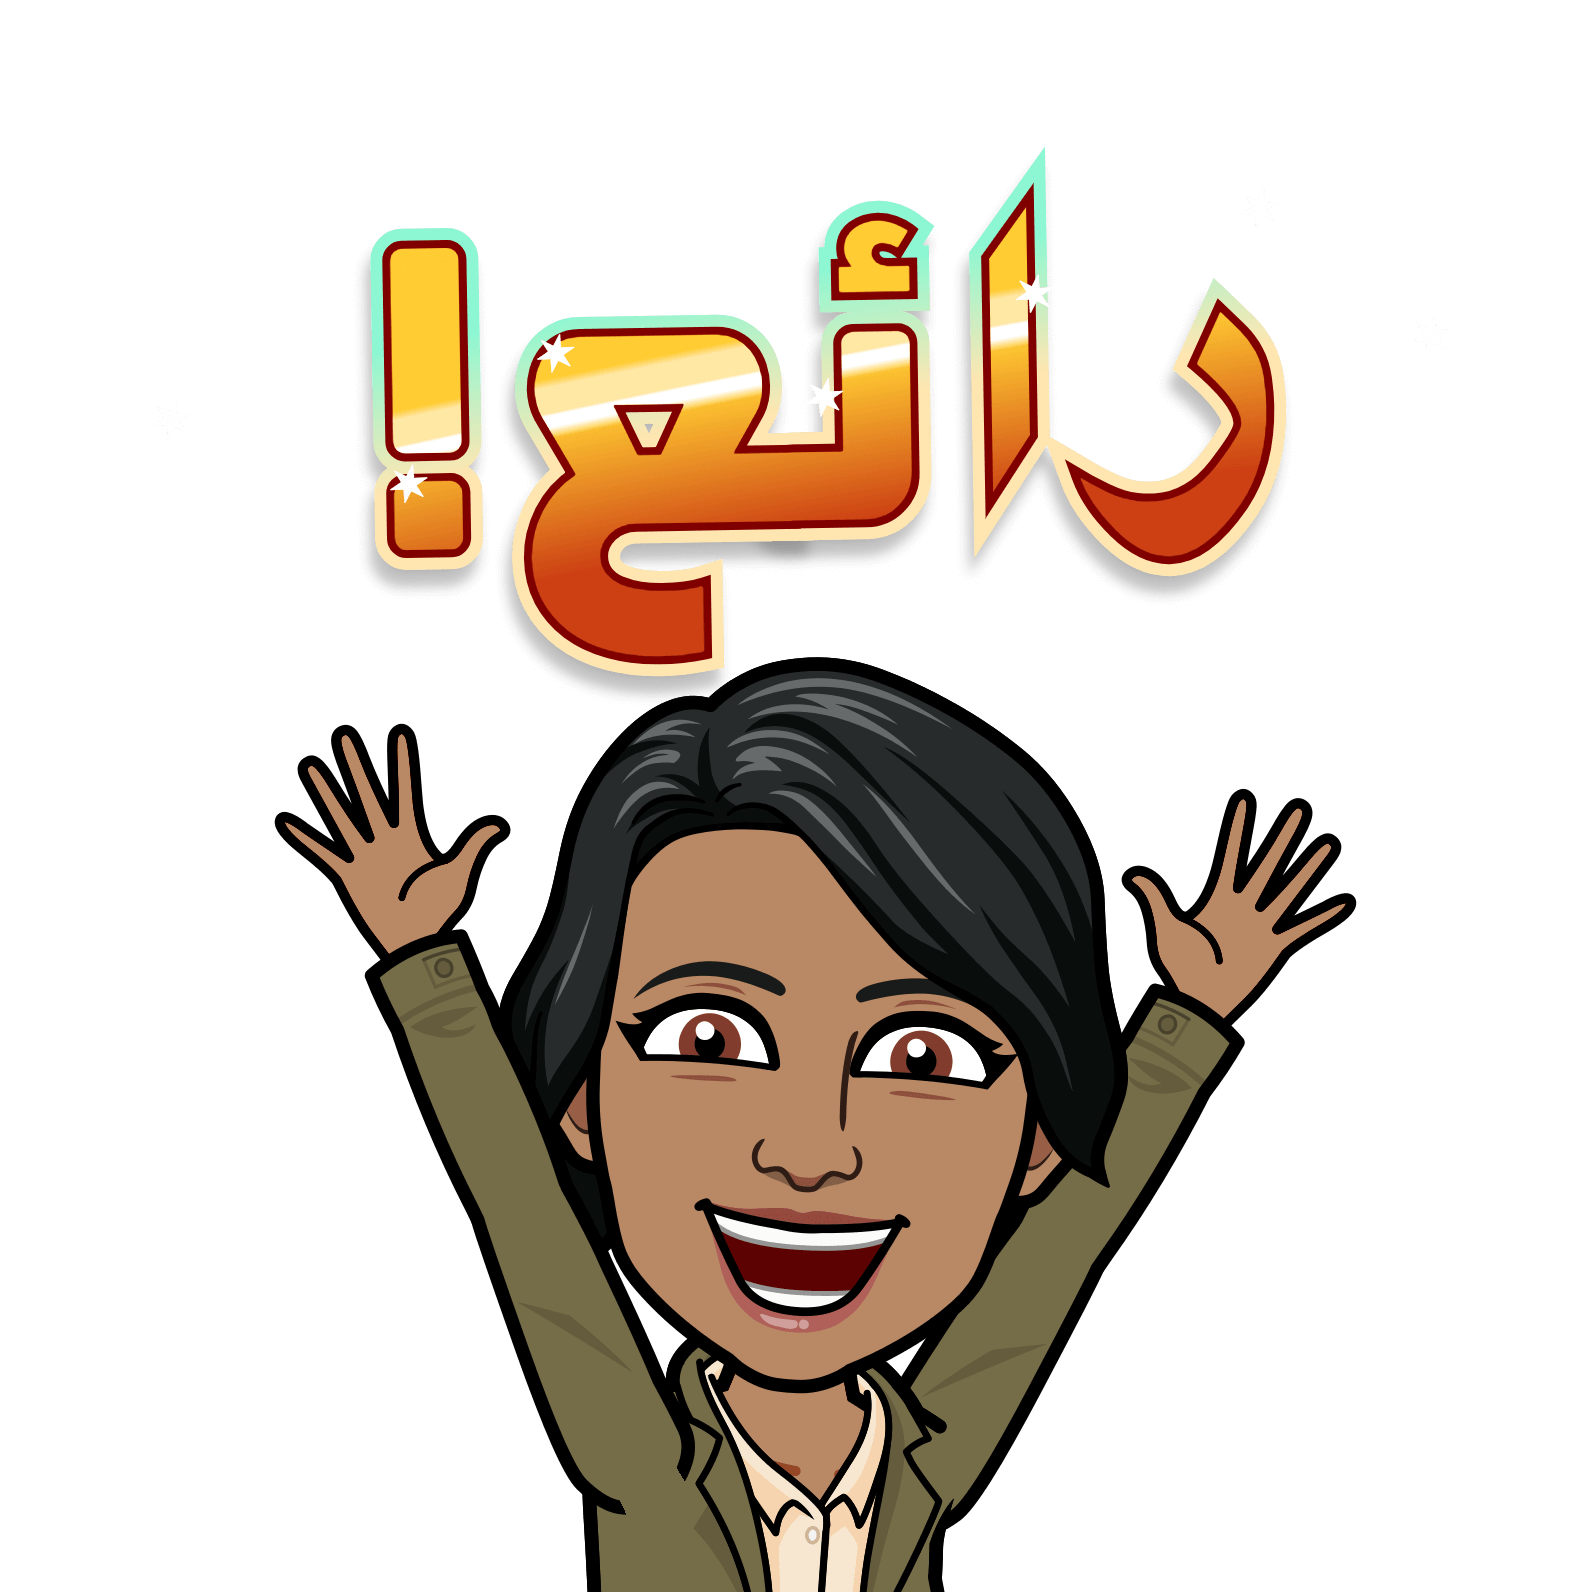 Middle East Snapchatters can now express themselves with Arabic Bitmojis